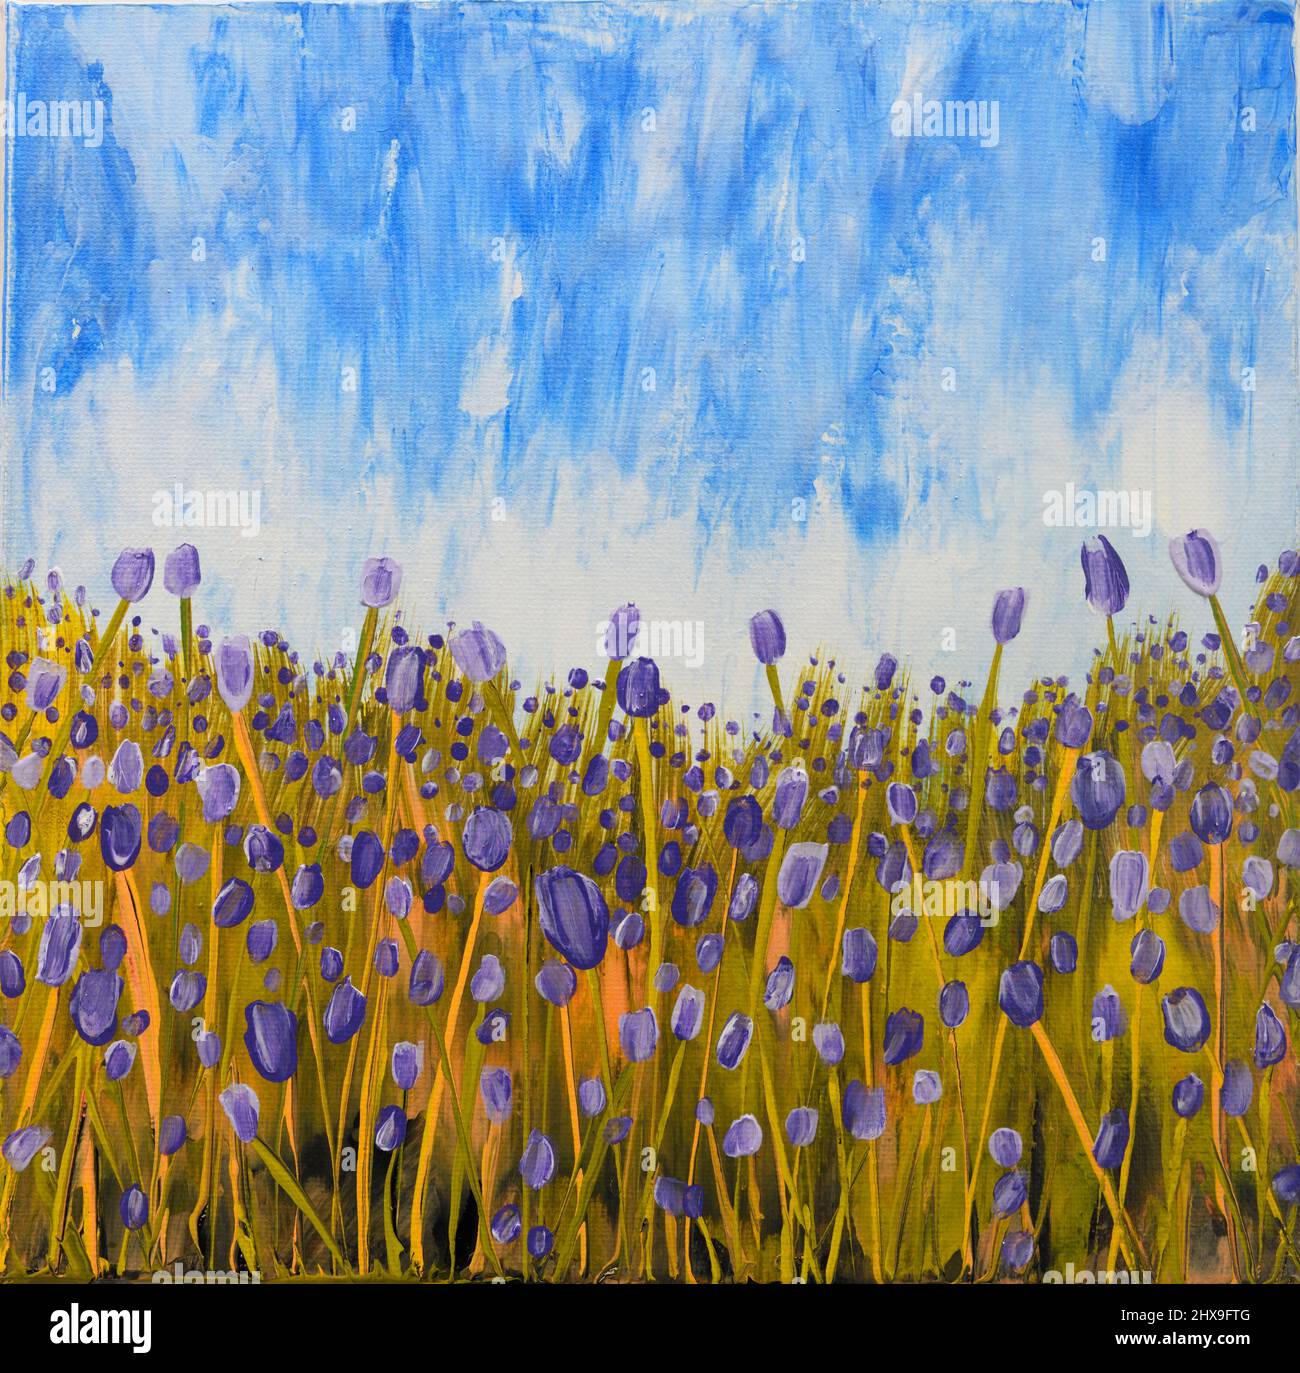 Abstract impressionist acrylic painting of field of purple flowers with blue sky Stock Photo